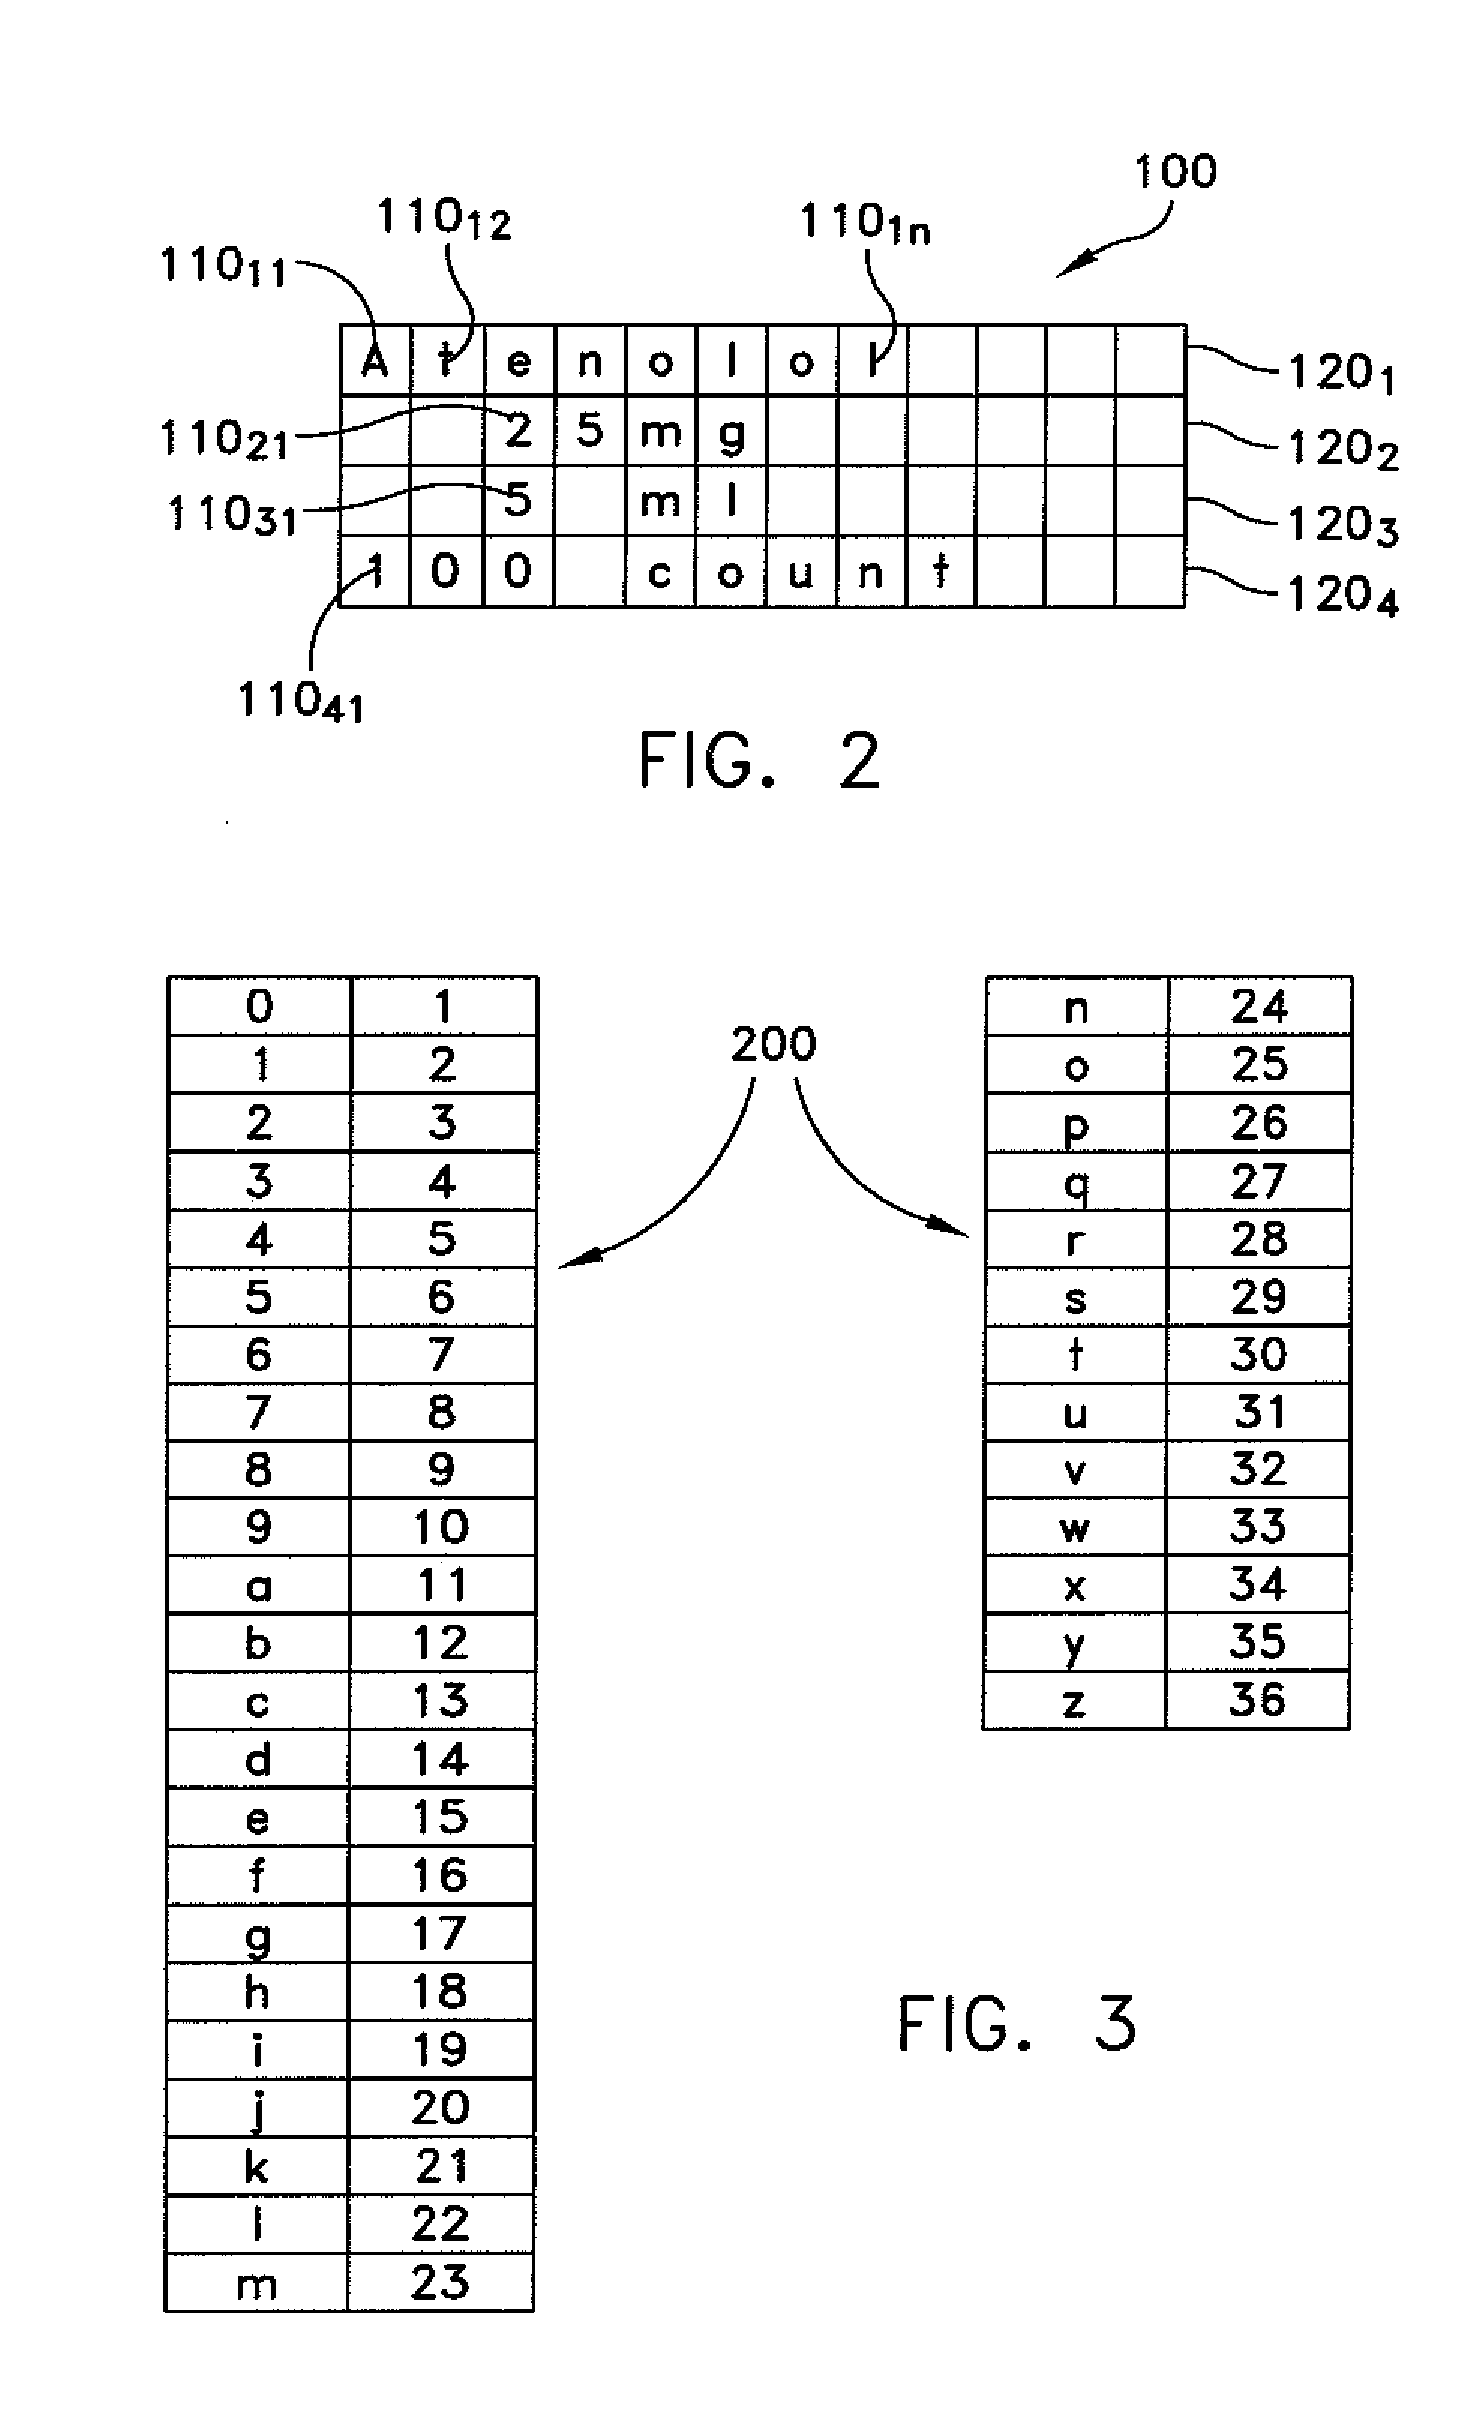 Method and System for Preparing a Set of Paired Identification Labels